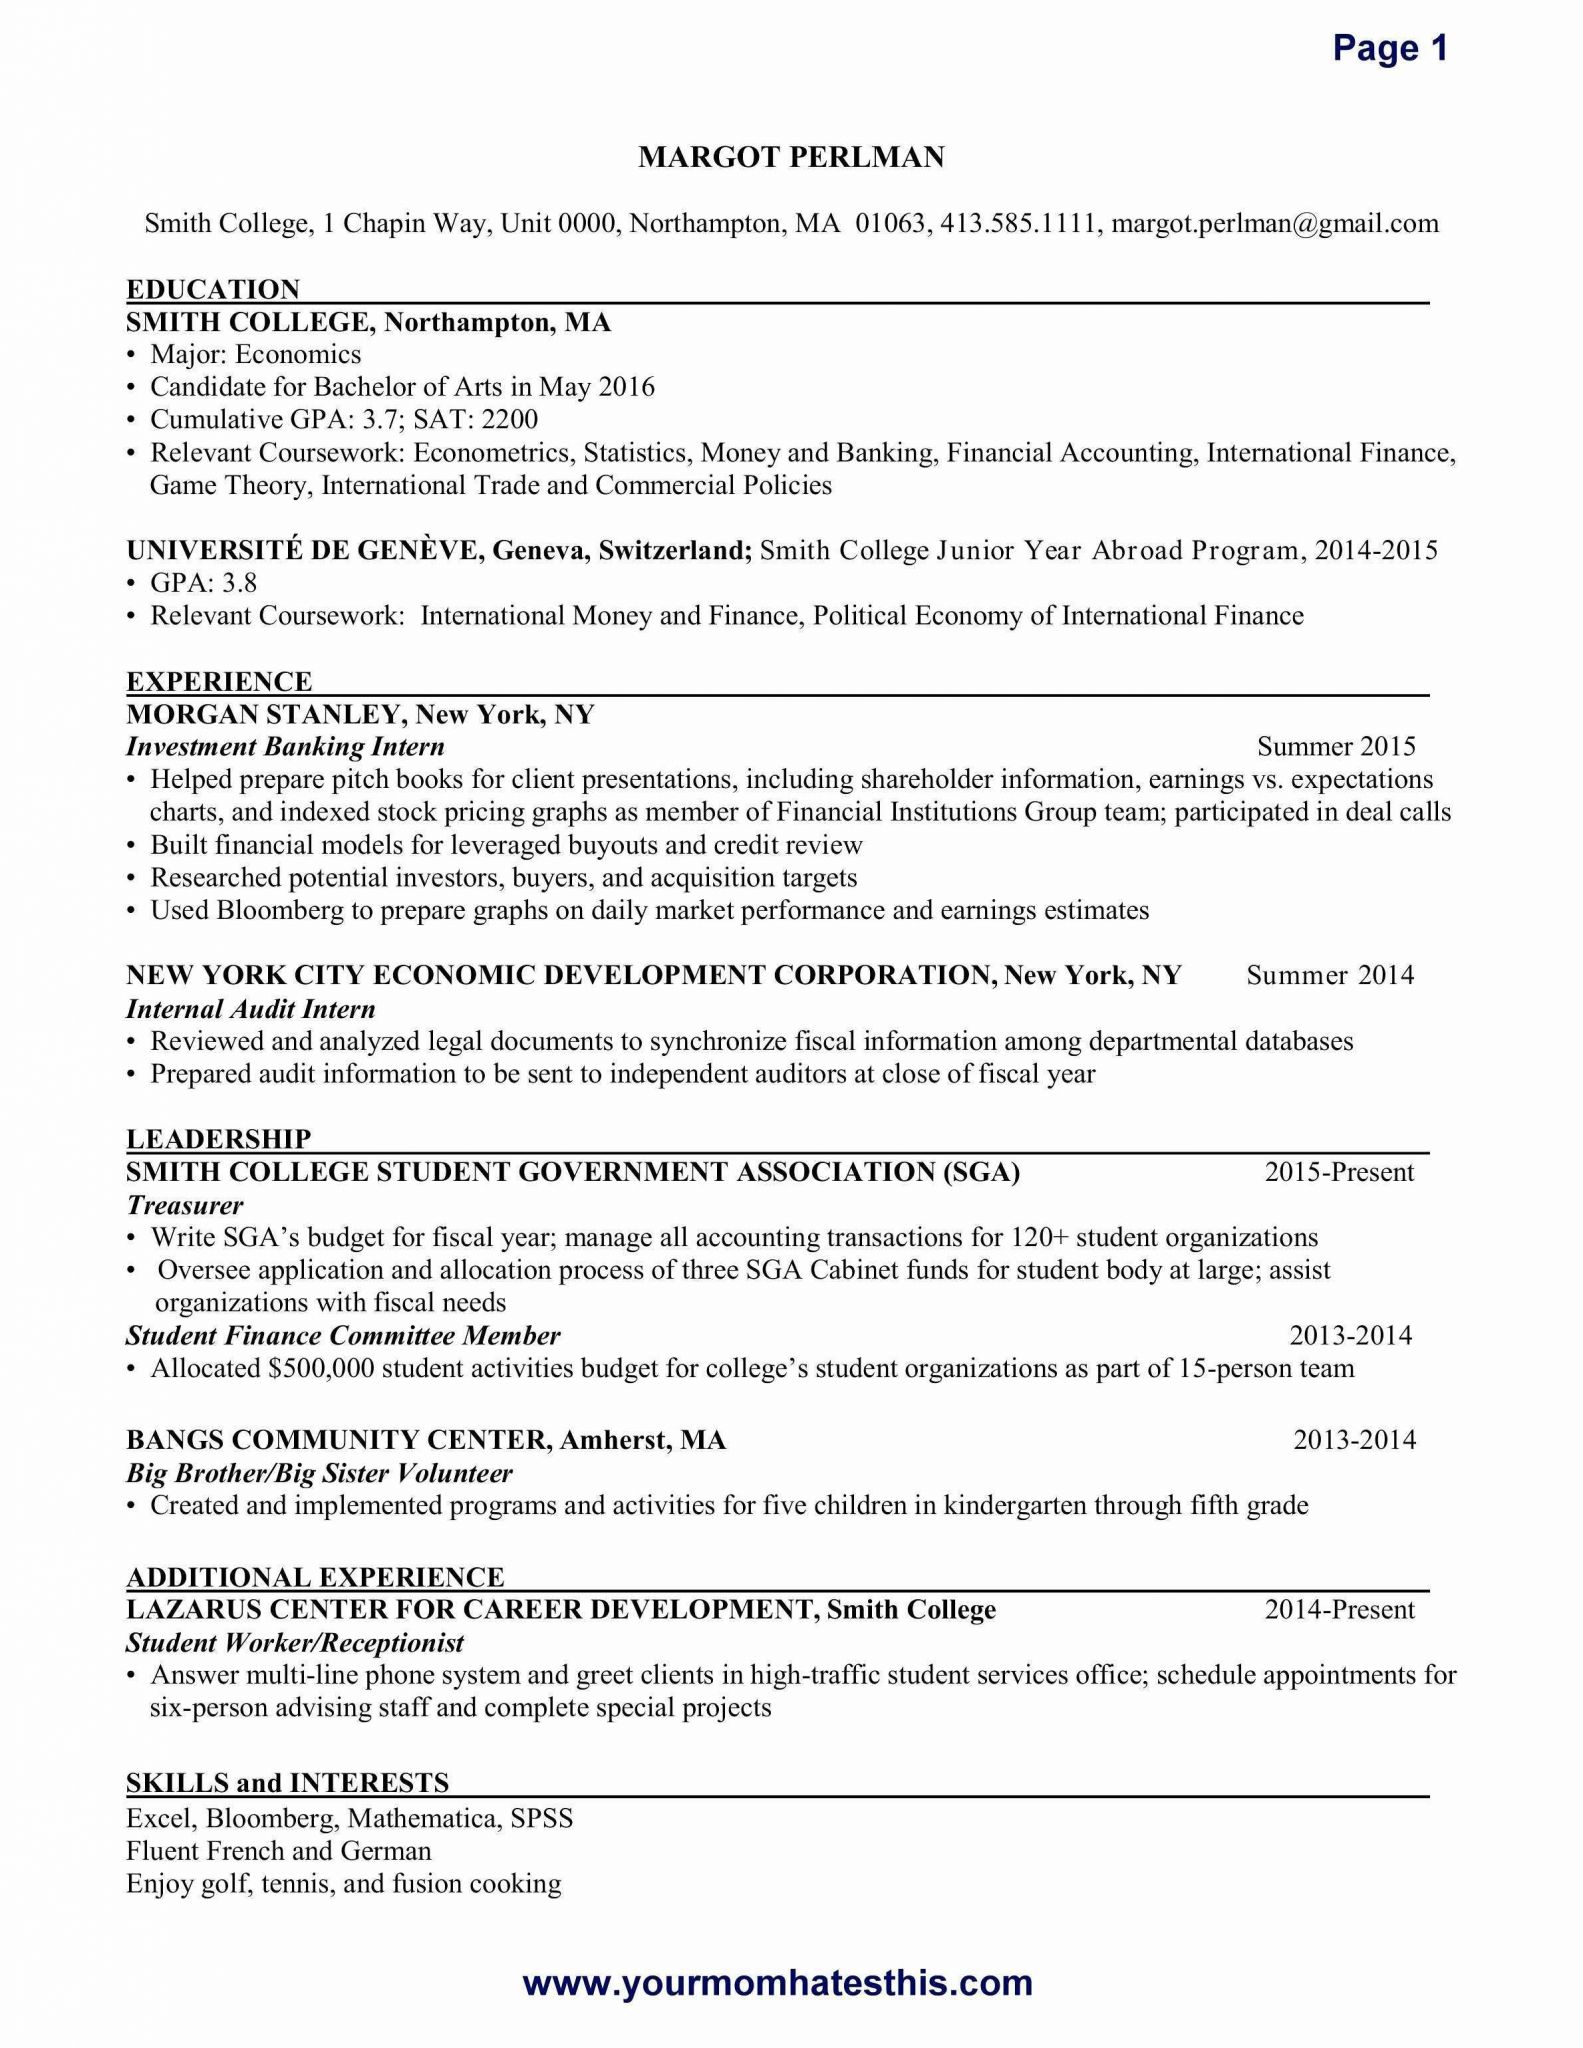 Writing Process Worksheet Also Finance Statement Template or Lovely Pr Resume Template Elegant